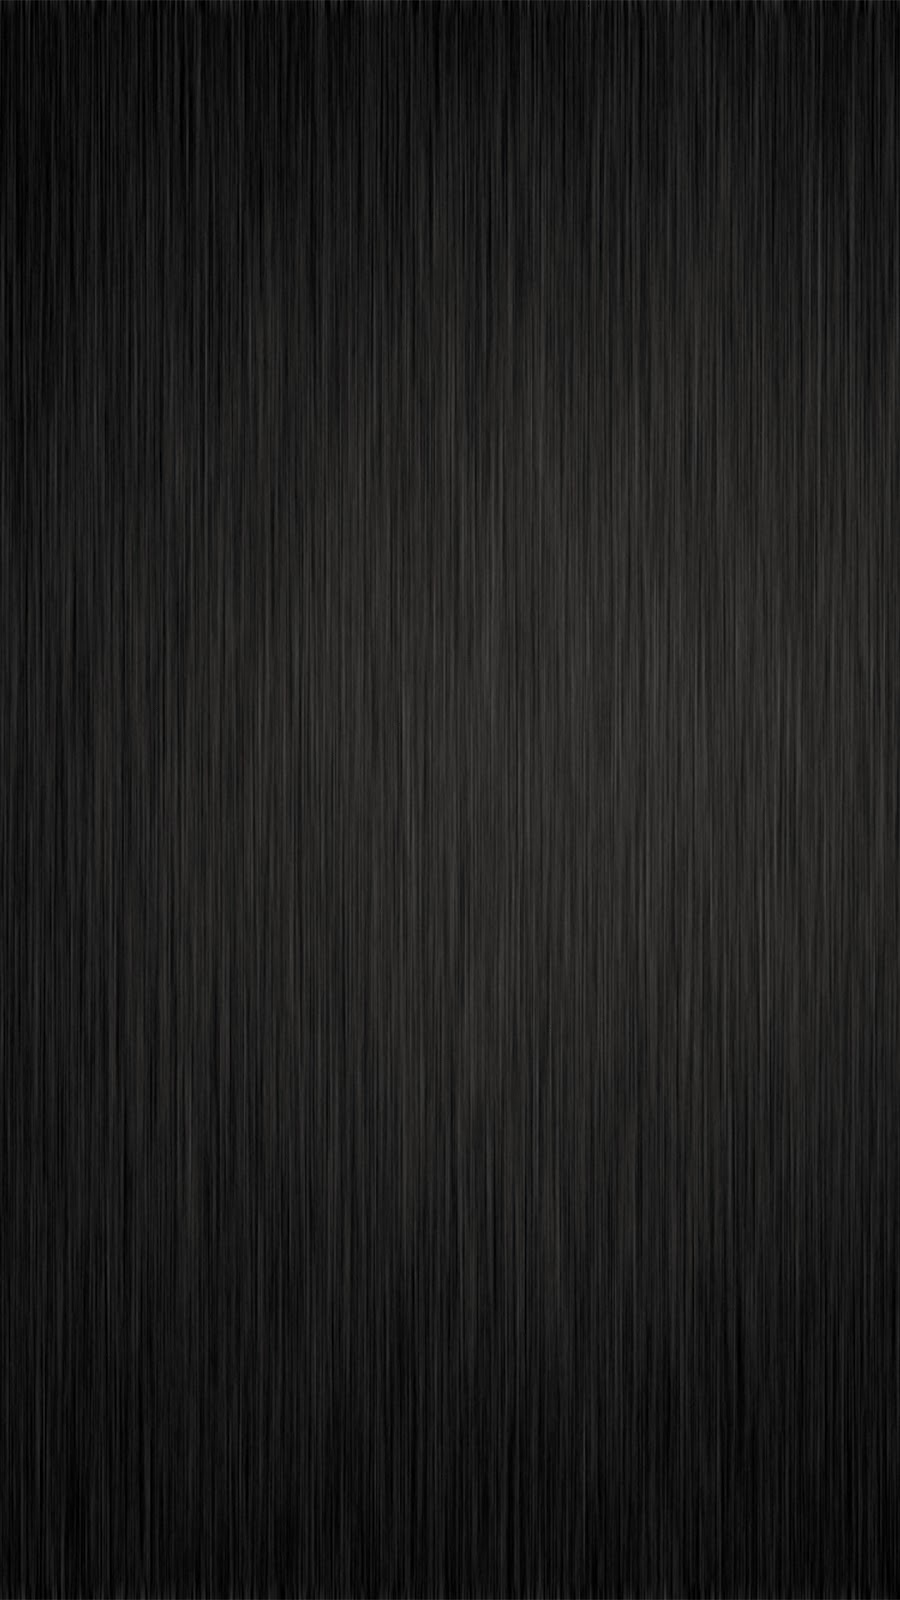 Simple Black And White Liniar Background HD Wallpaper Jpg